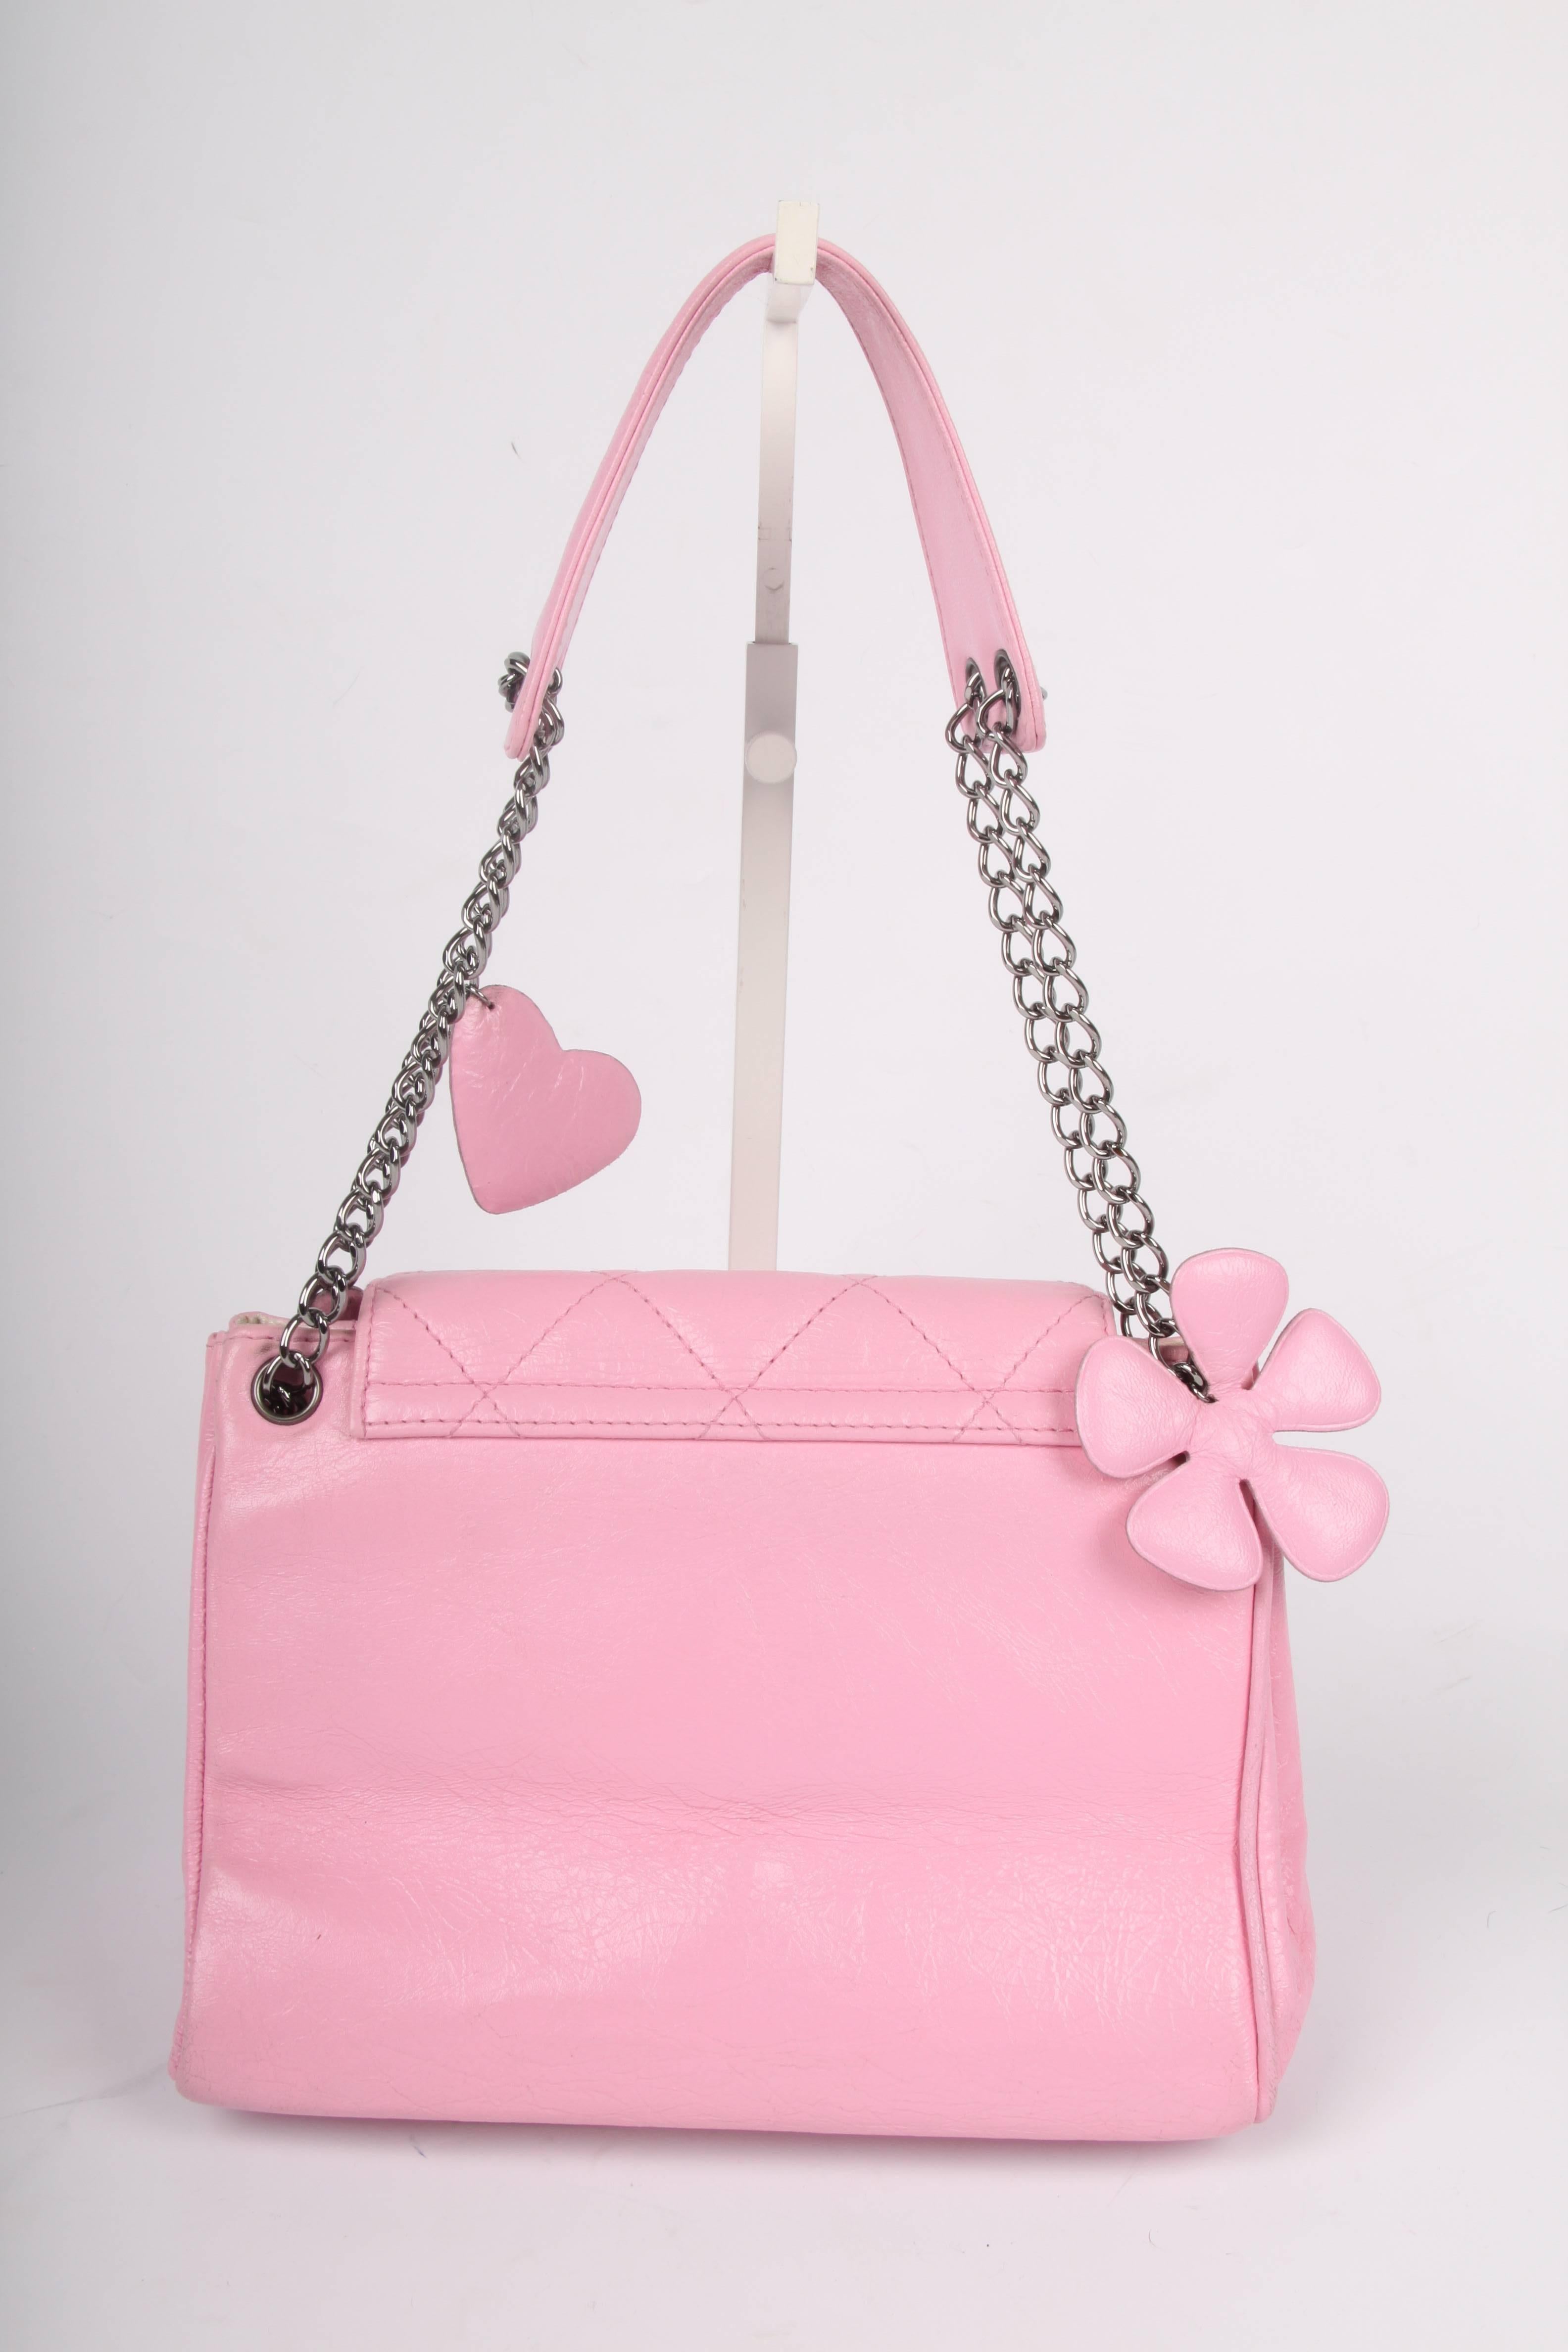 Sooo sweet! Chanel bag with leather hearts and a flower dangle attached to the chain...

Front closure with a large silver-tone lock embossed with CC and CHANEL. The pink leather has a 'crinkled' look and the flap and front are both quilted.

Lining